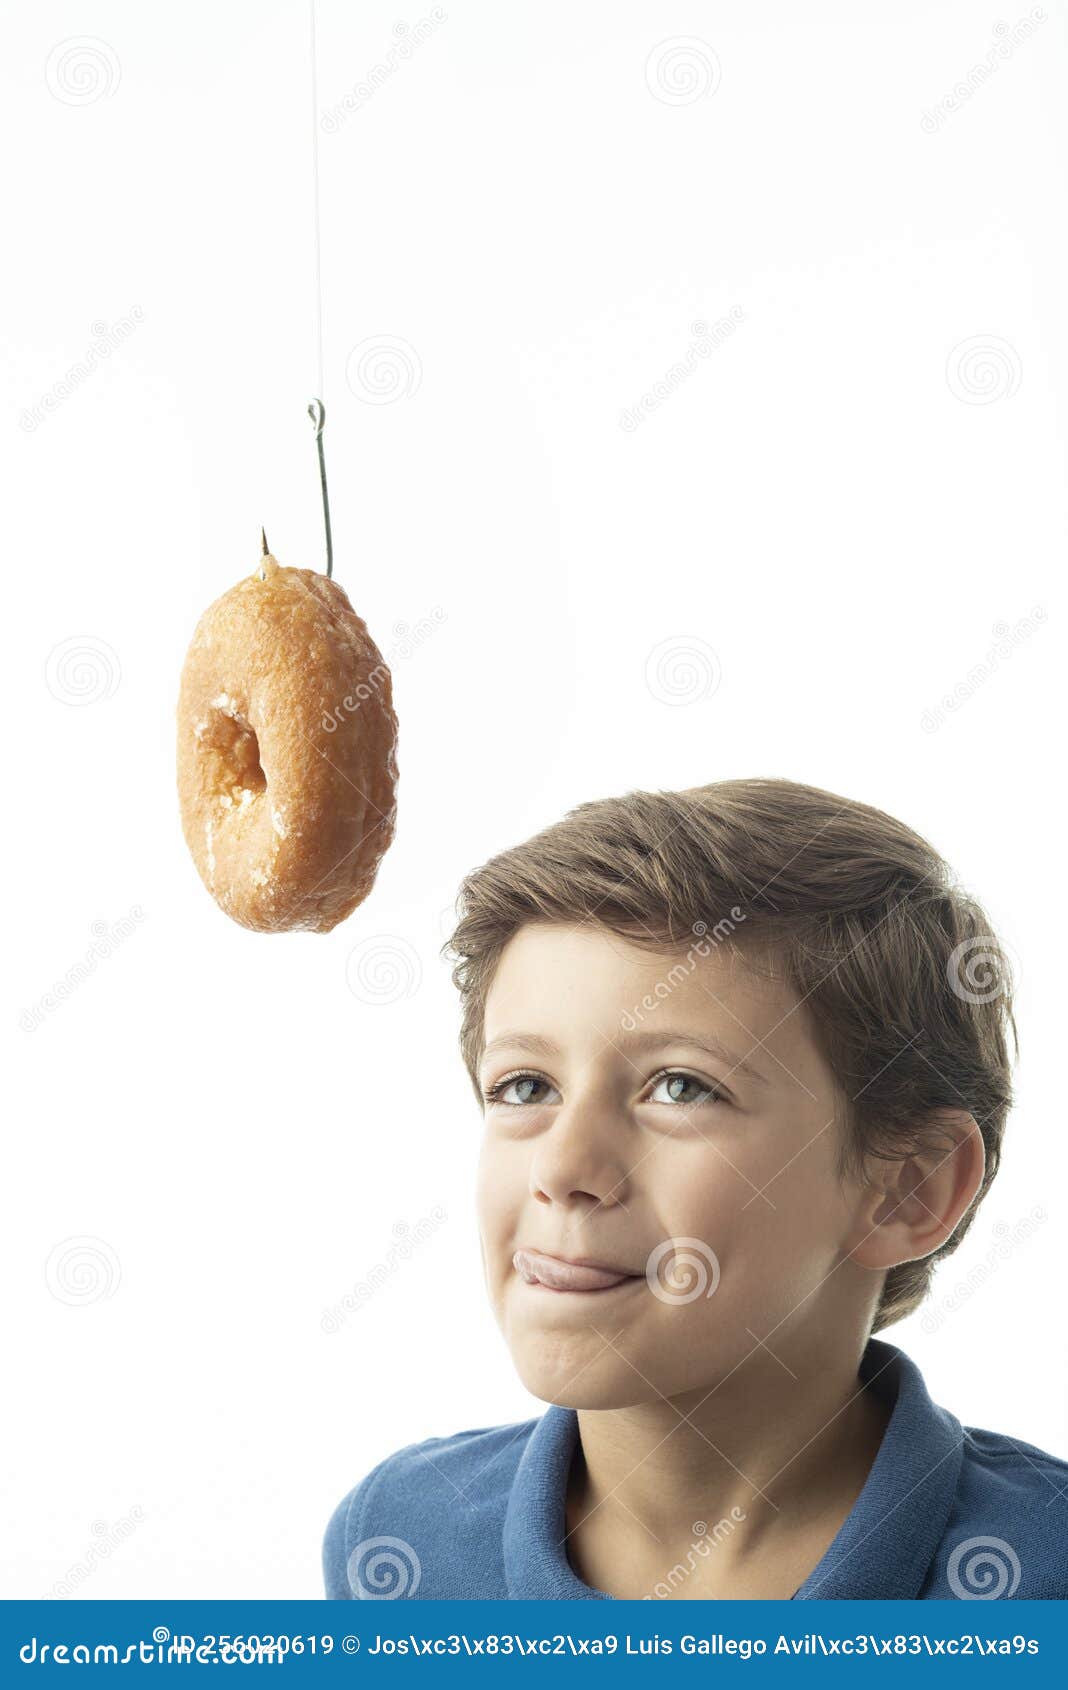 a child looks longingly at a doughnut hanging from a hook